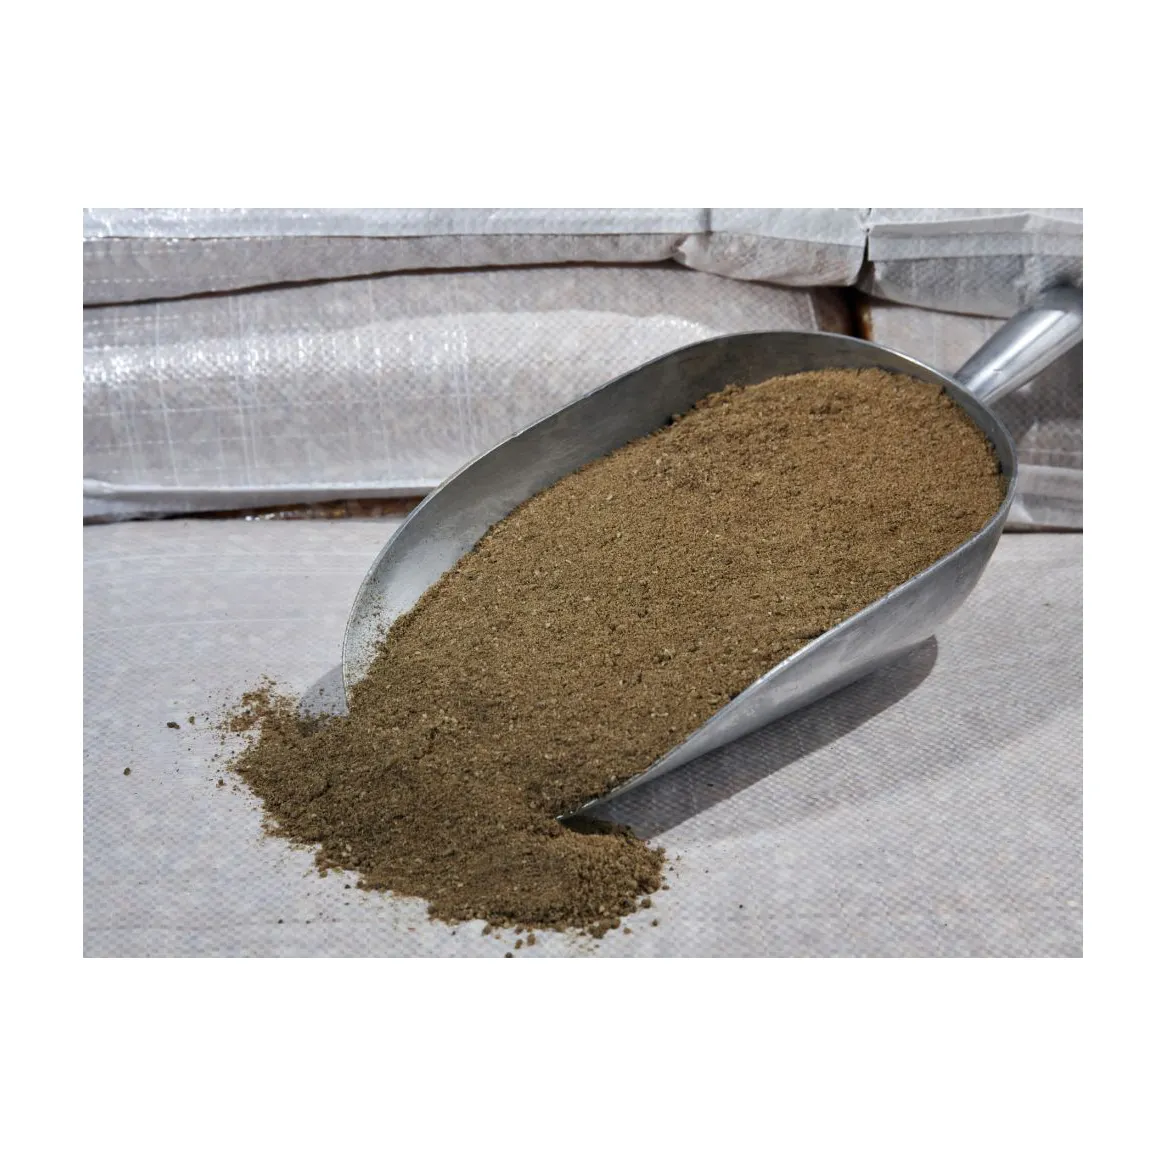 High Quality Meat Bone Meal (Animal Feed) Available For Sale at Cheap Price